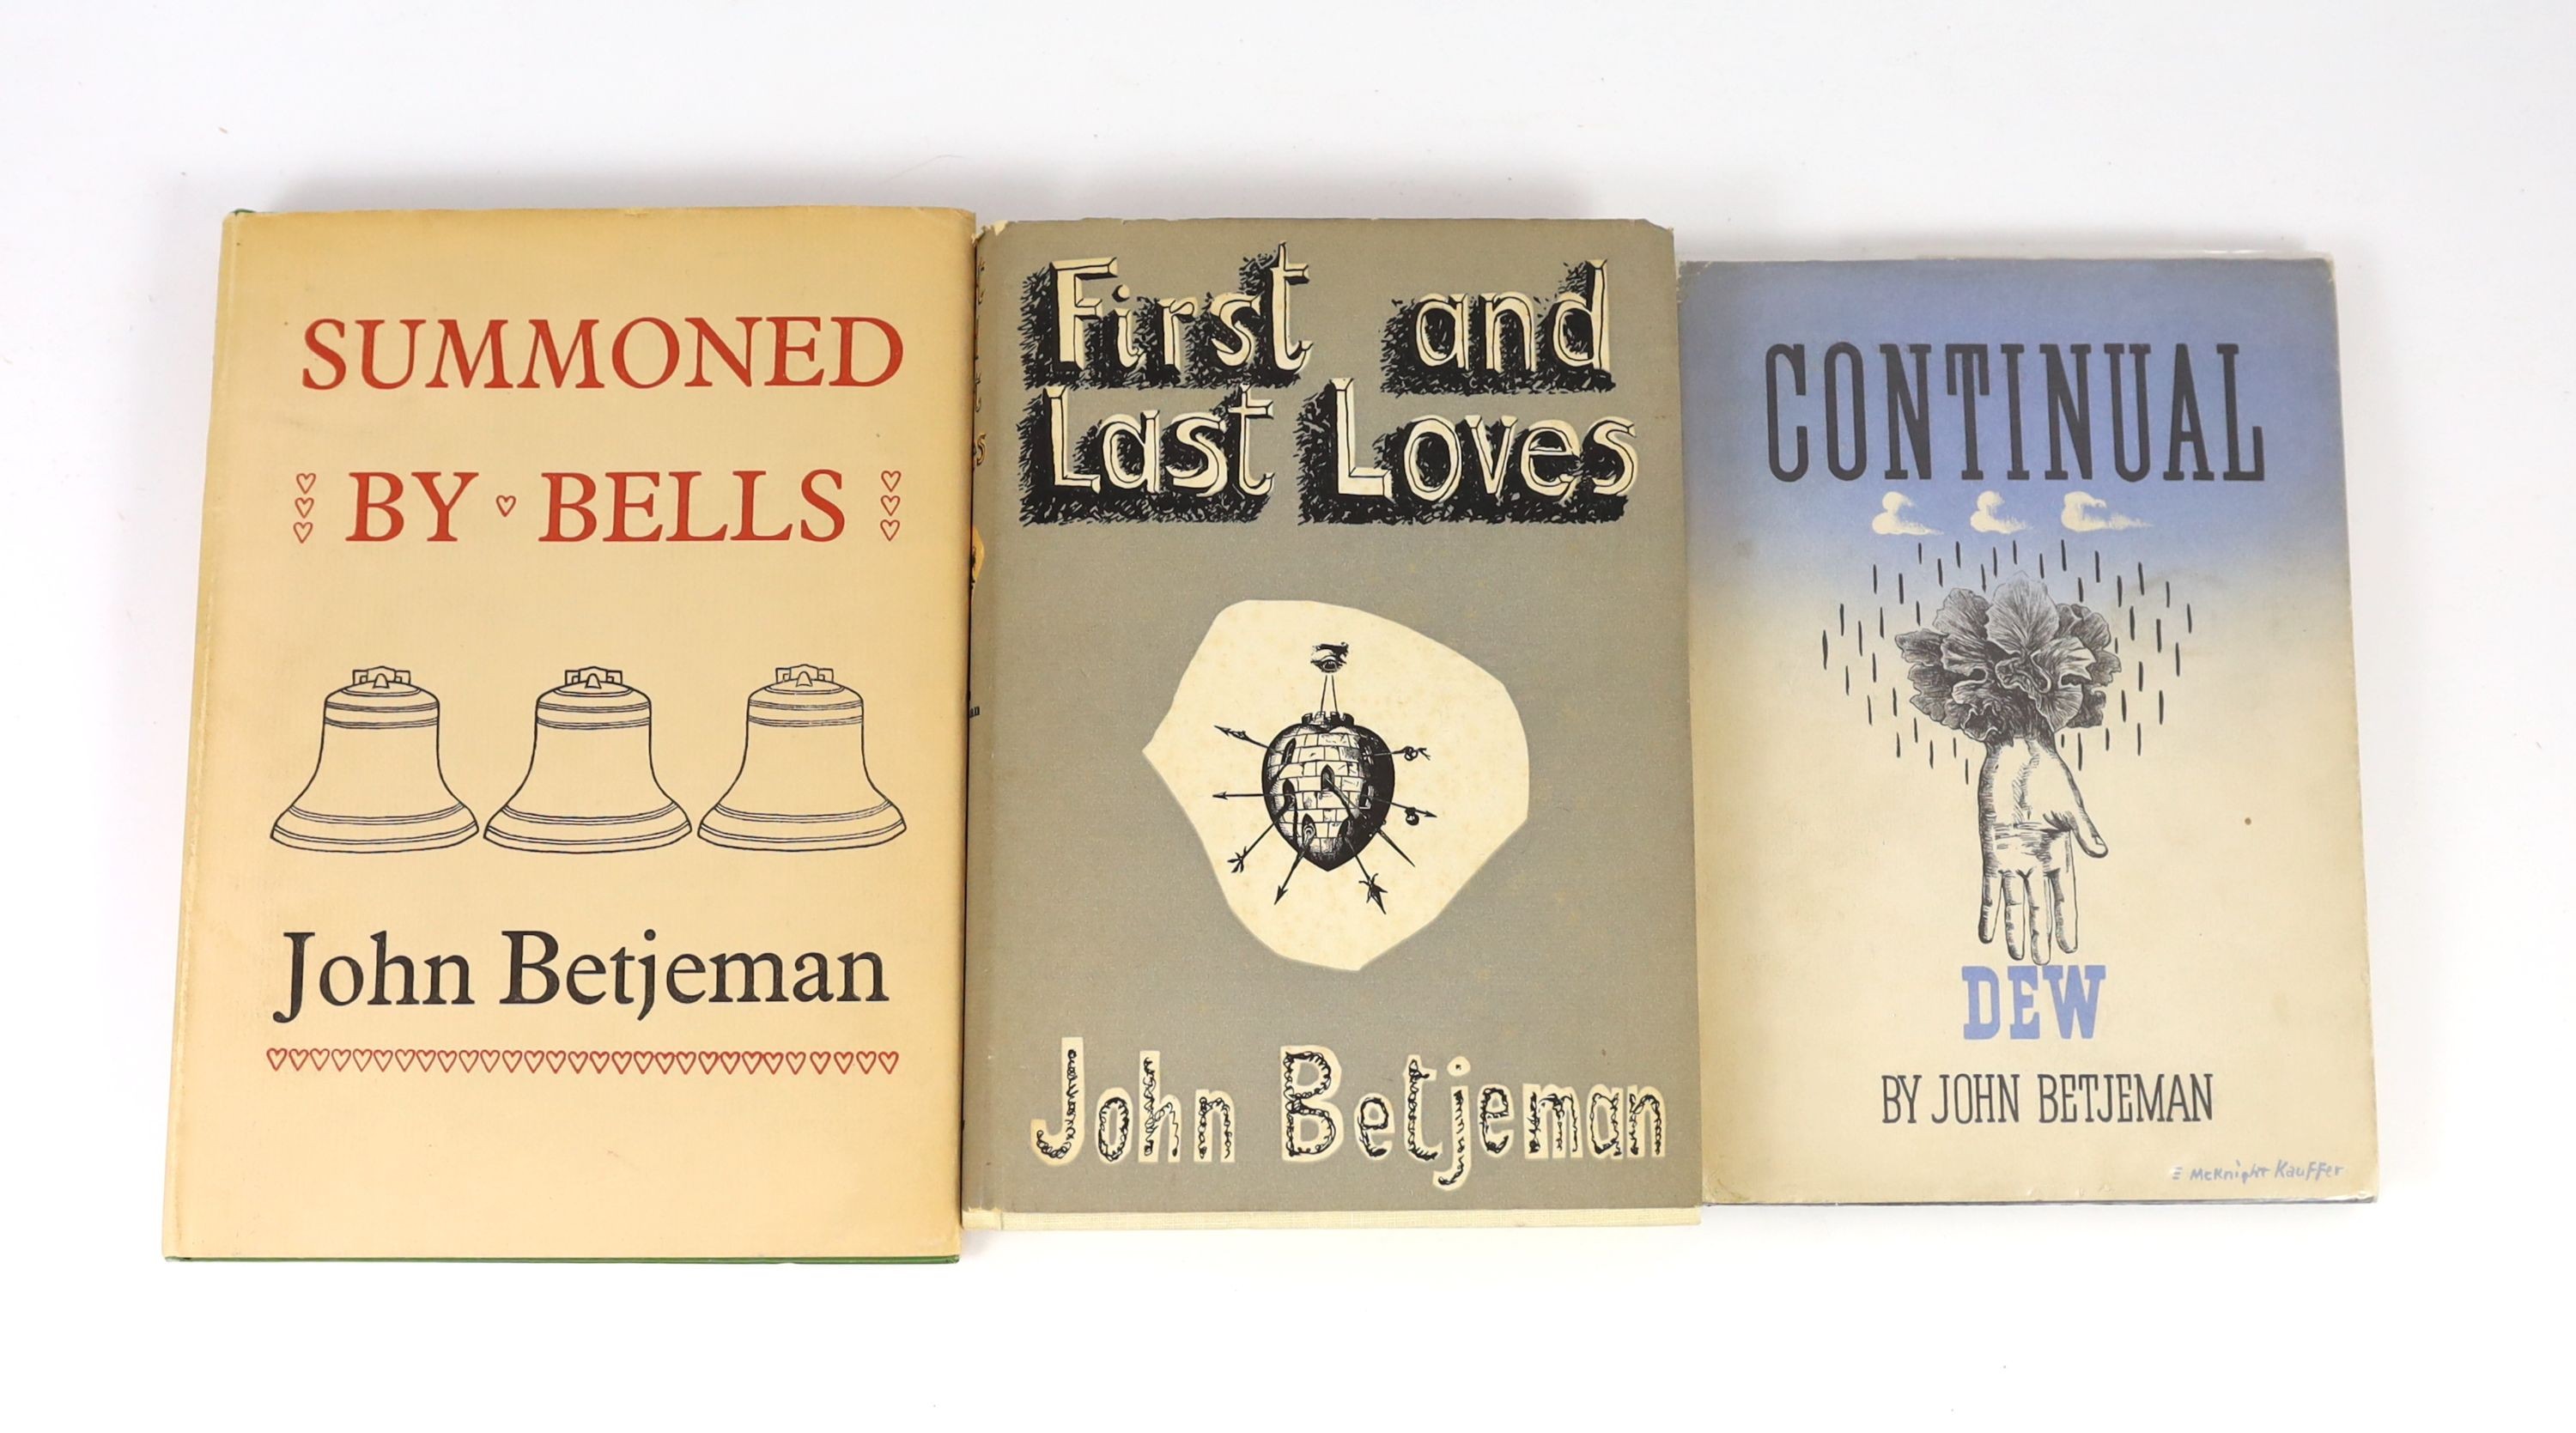 Betjeman, John - 3 works:- Continual Dew, 1st edition, original cloth in unclipped d/j, with price sticker,(8/6 net), John Murray, London, 1937; First and Last Loves, in price clipped d/j, John Murray, London 1952 and Su